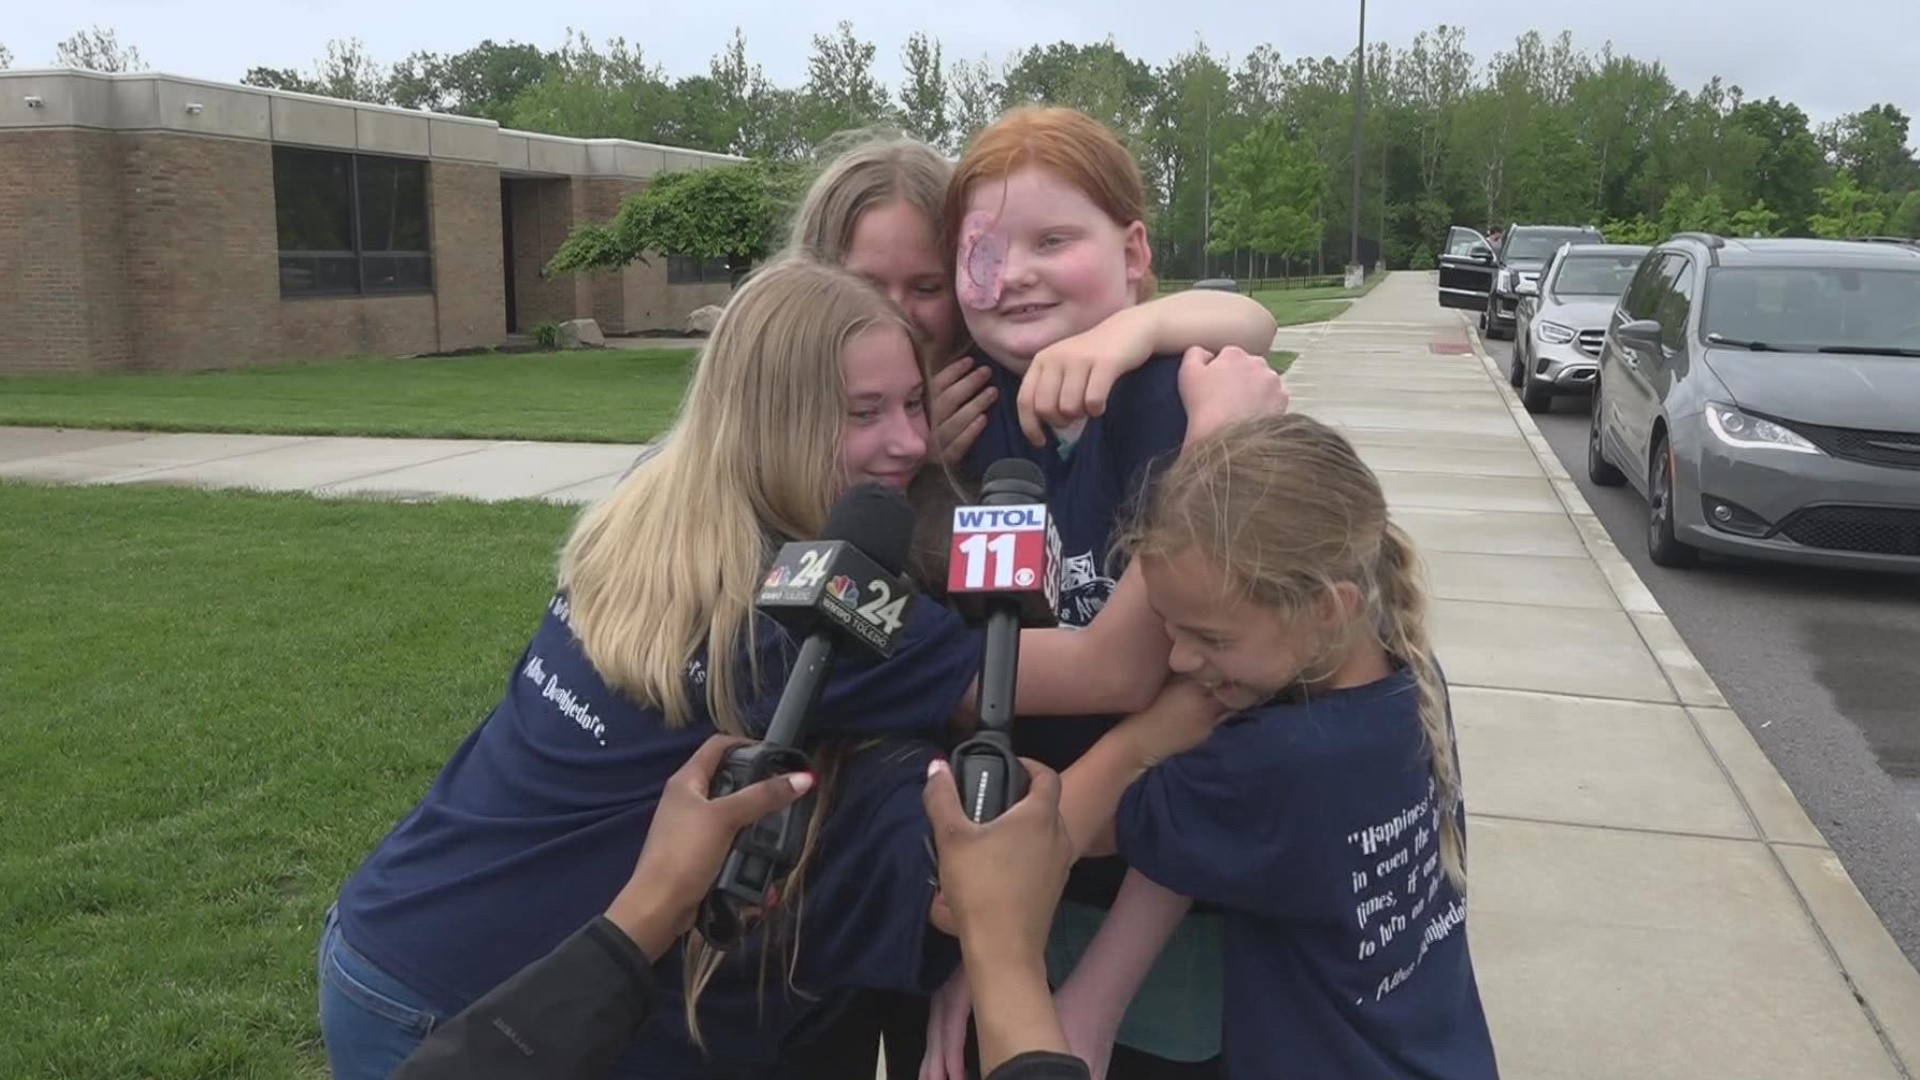 11-year-old Emily Scholz is known as a sweet and friendly girl who loves Harry Potter. Her classmates at Fallen Timbers Middle School in support of her cancer battle